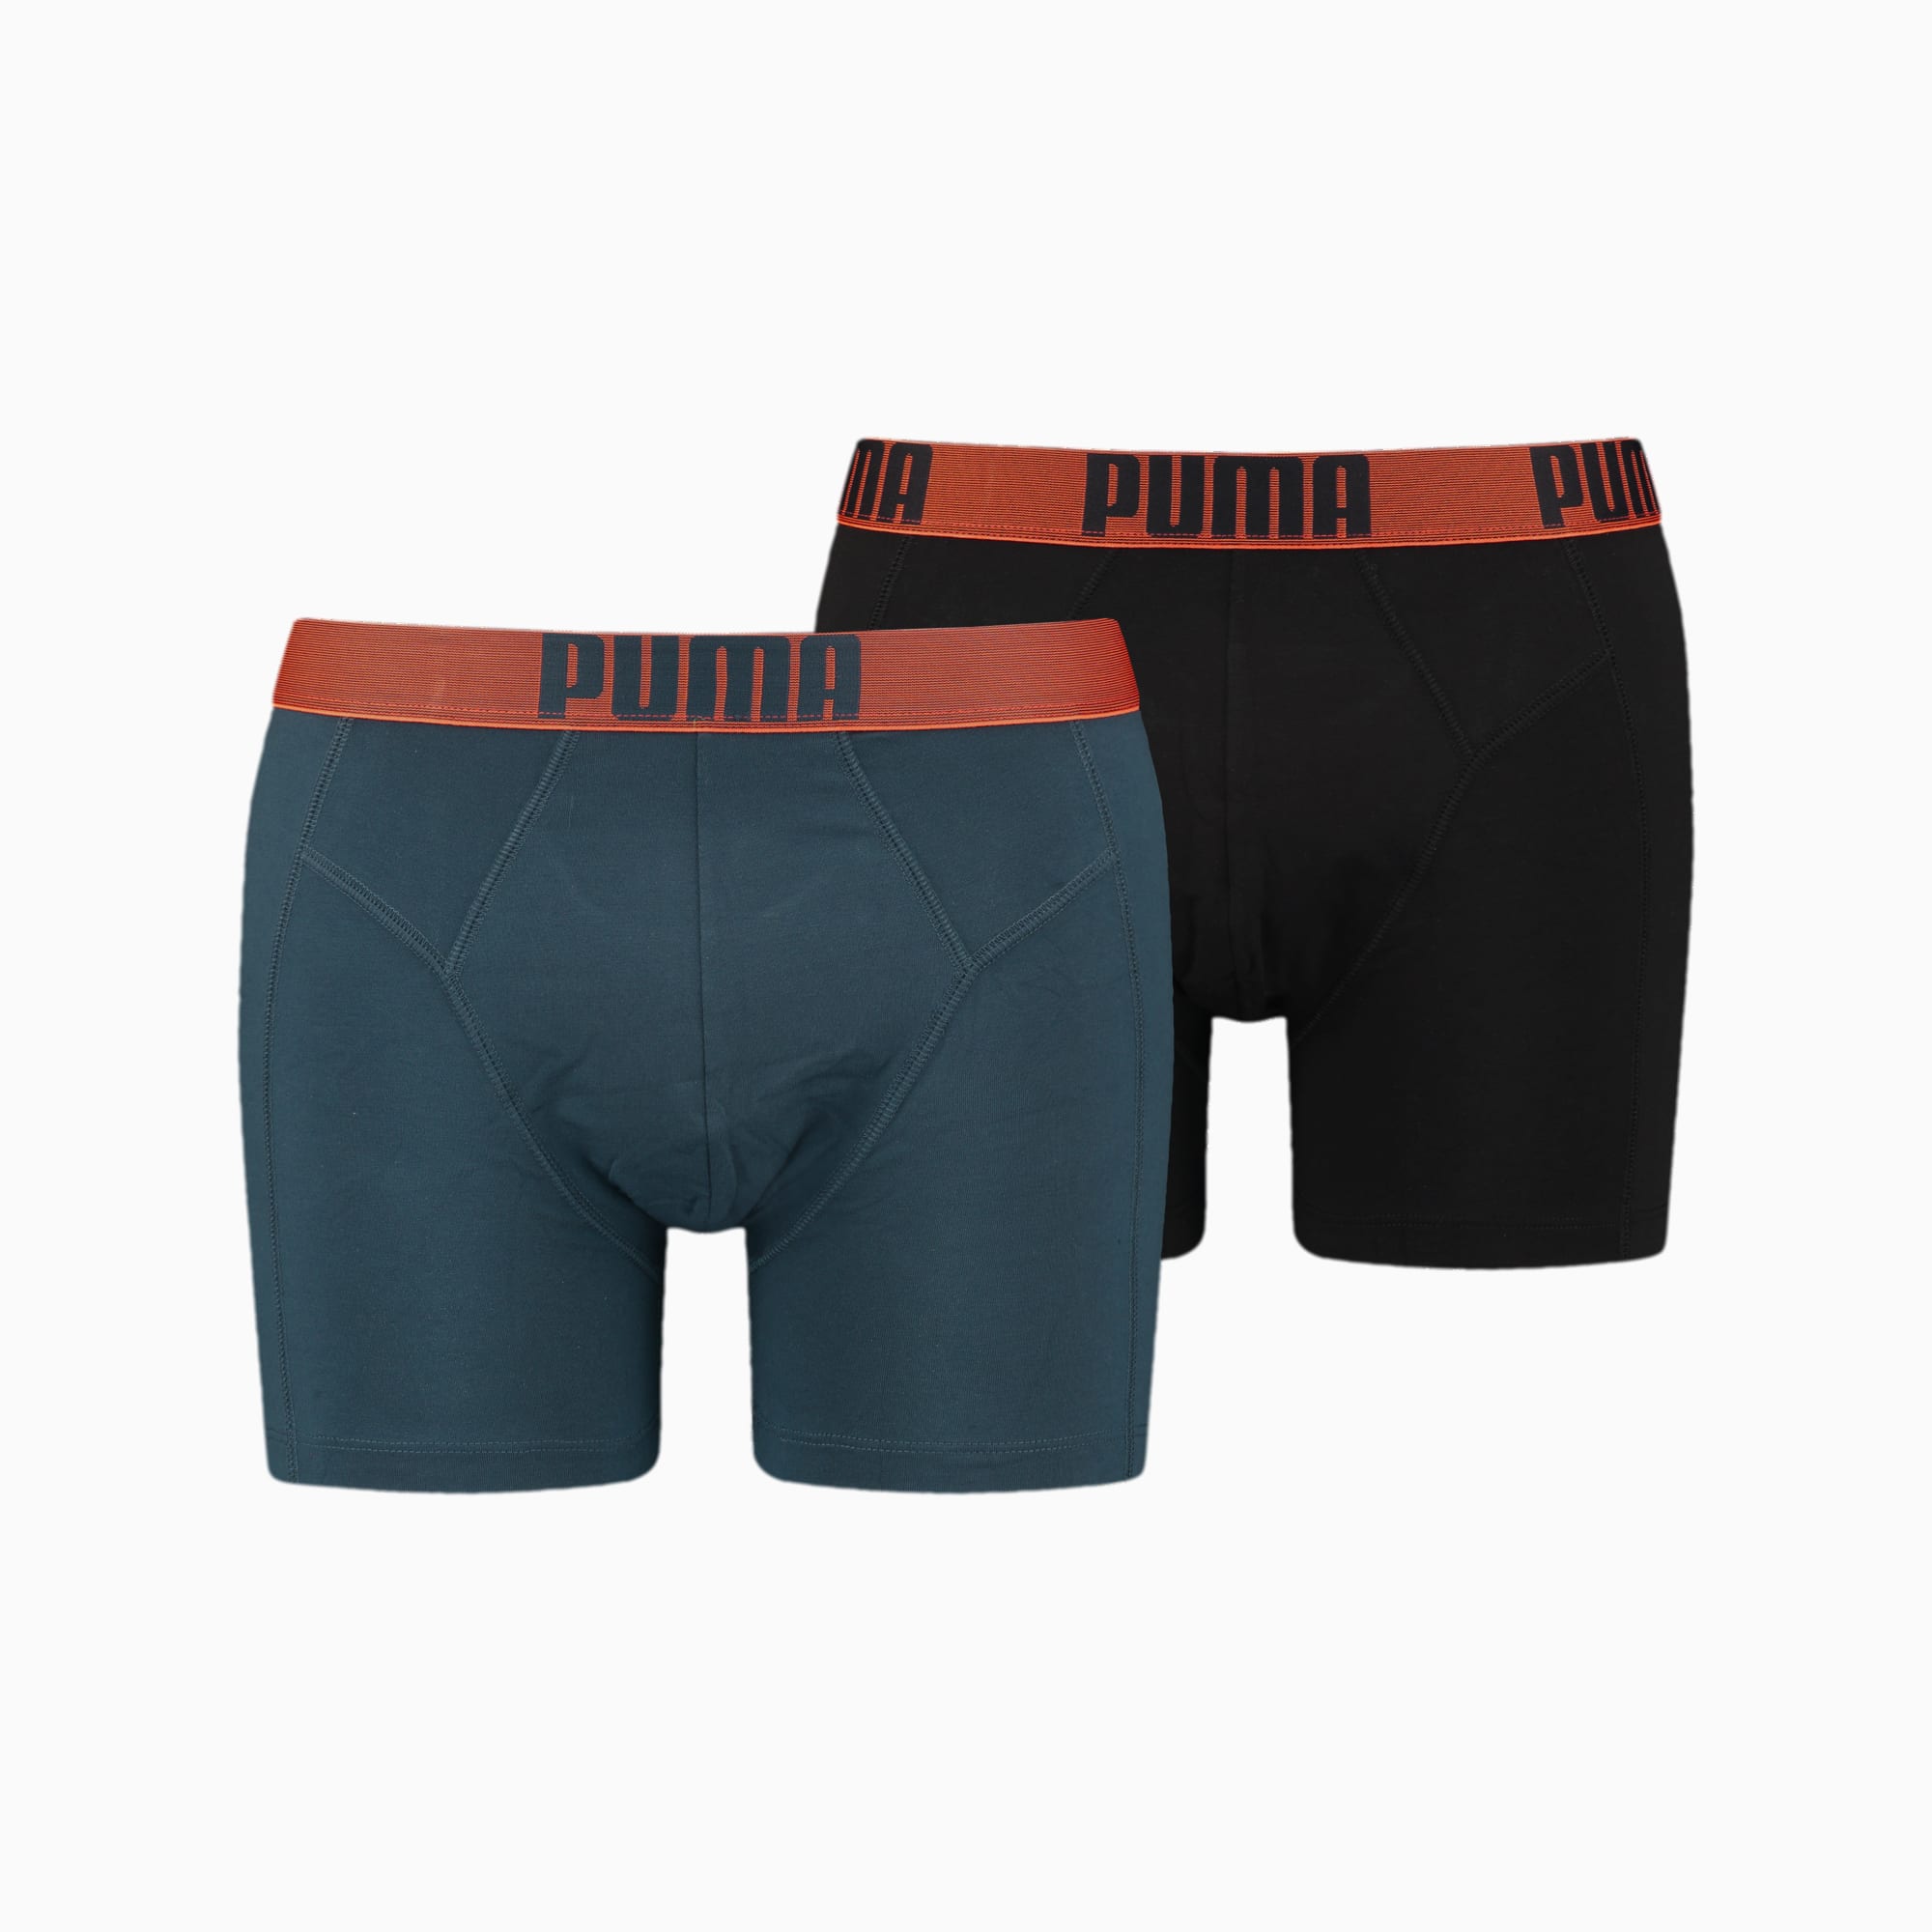 PUMA Men's Tailored Fit Pouch Boxers 2 Pack, Dark Blue